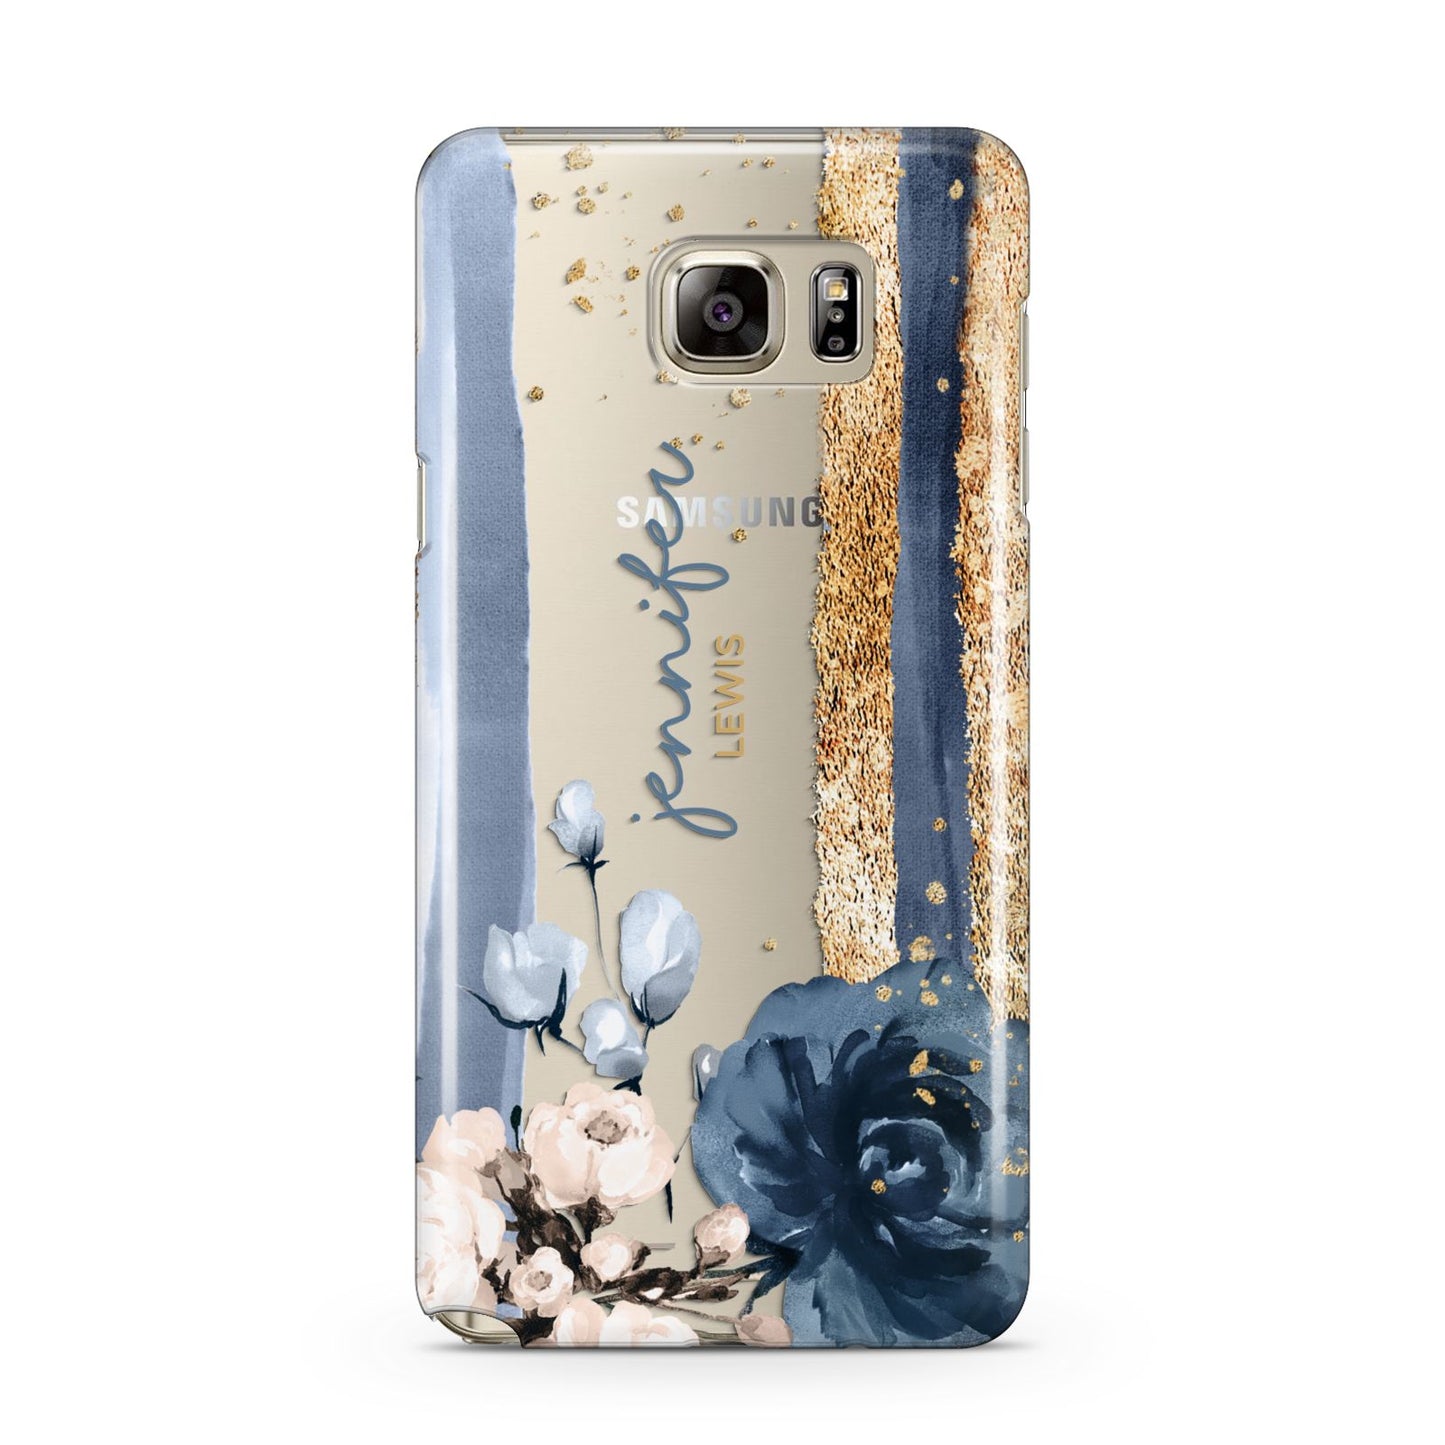 Personalised Blue Gold Name Samsung Galaxy Note 5 Case